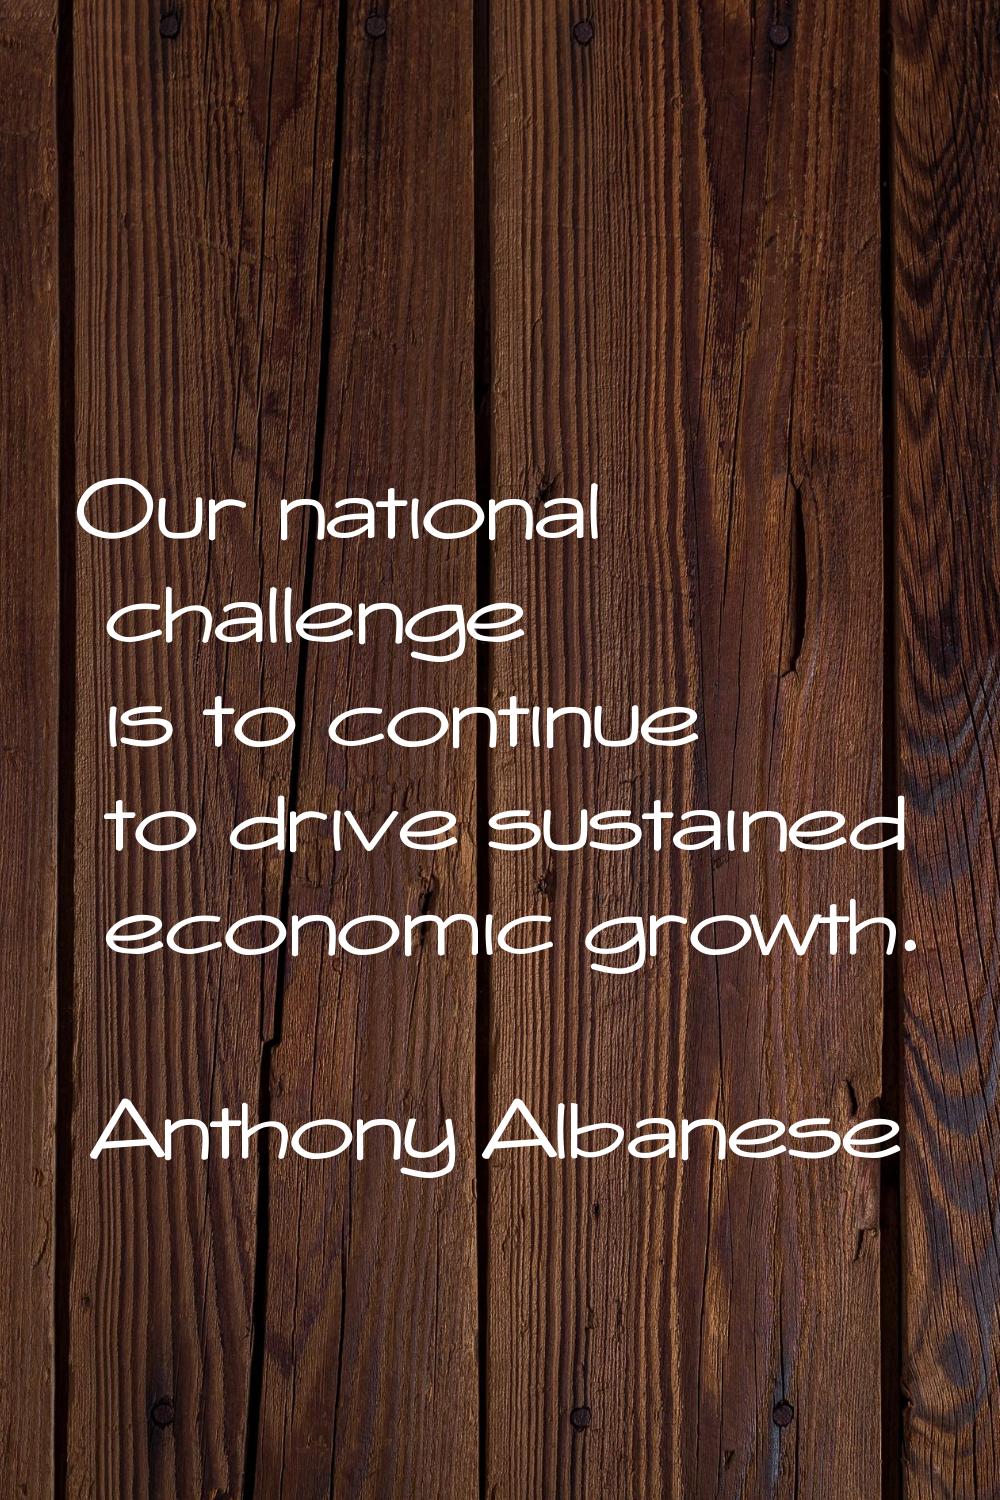 Our national challenge is to continue to drive sustained economic growth.